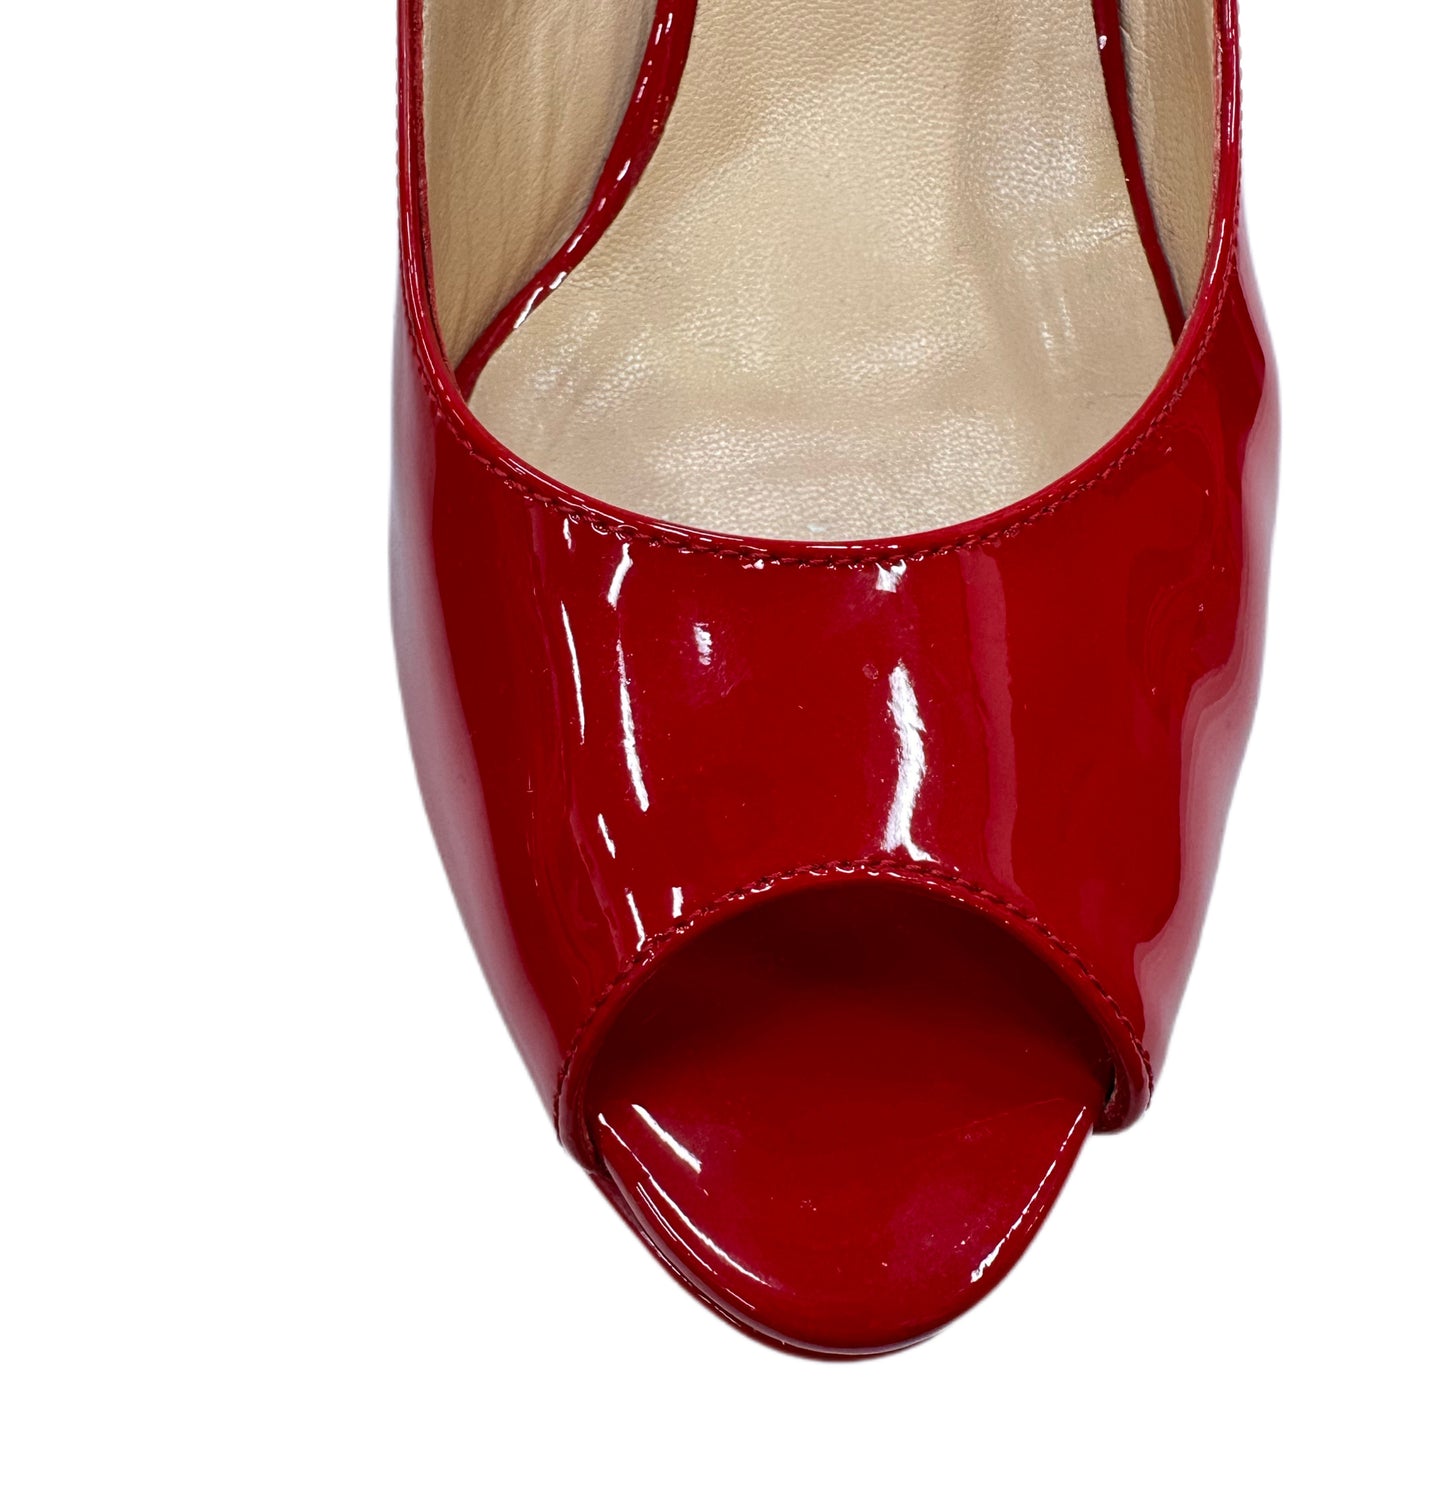 JIMMY CHOO Red Patent Leather Slingback 38.5